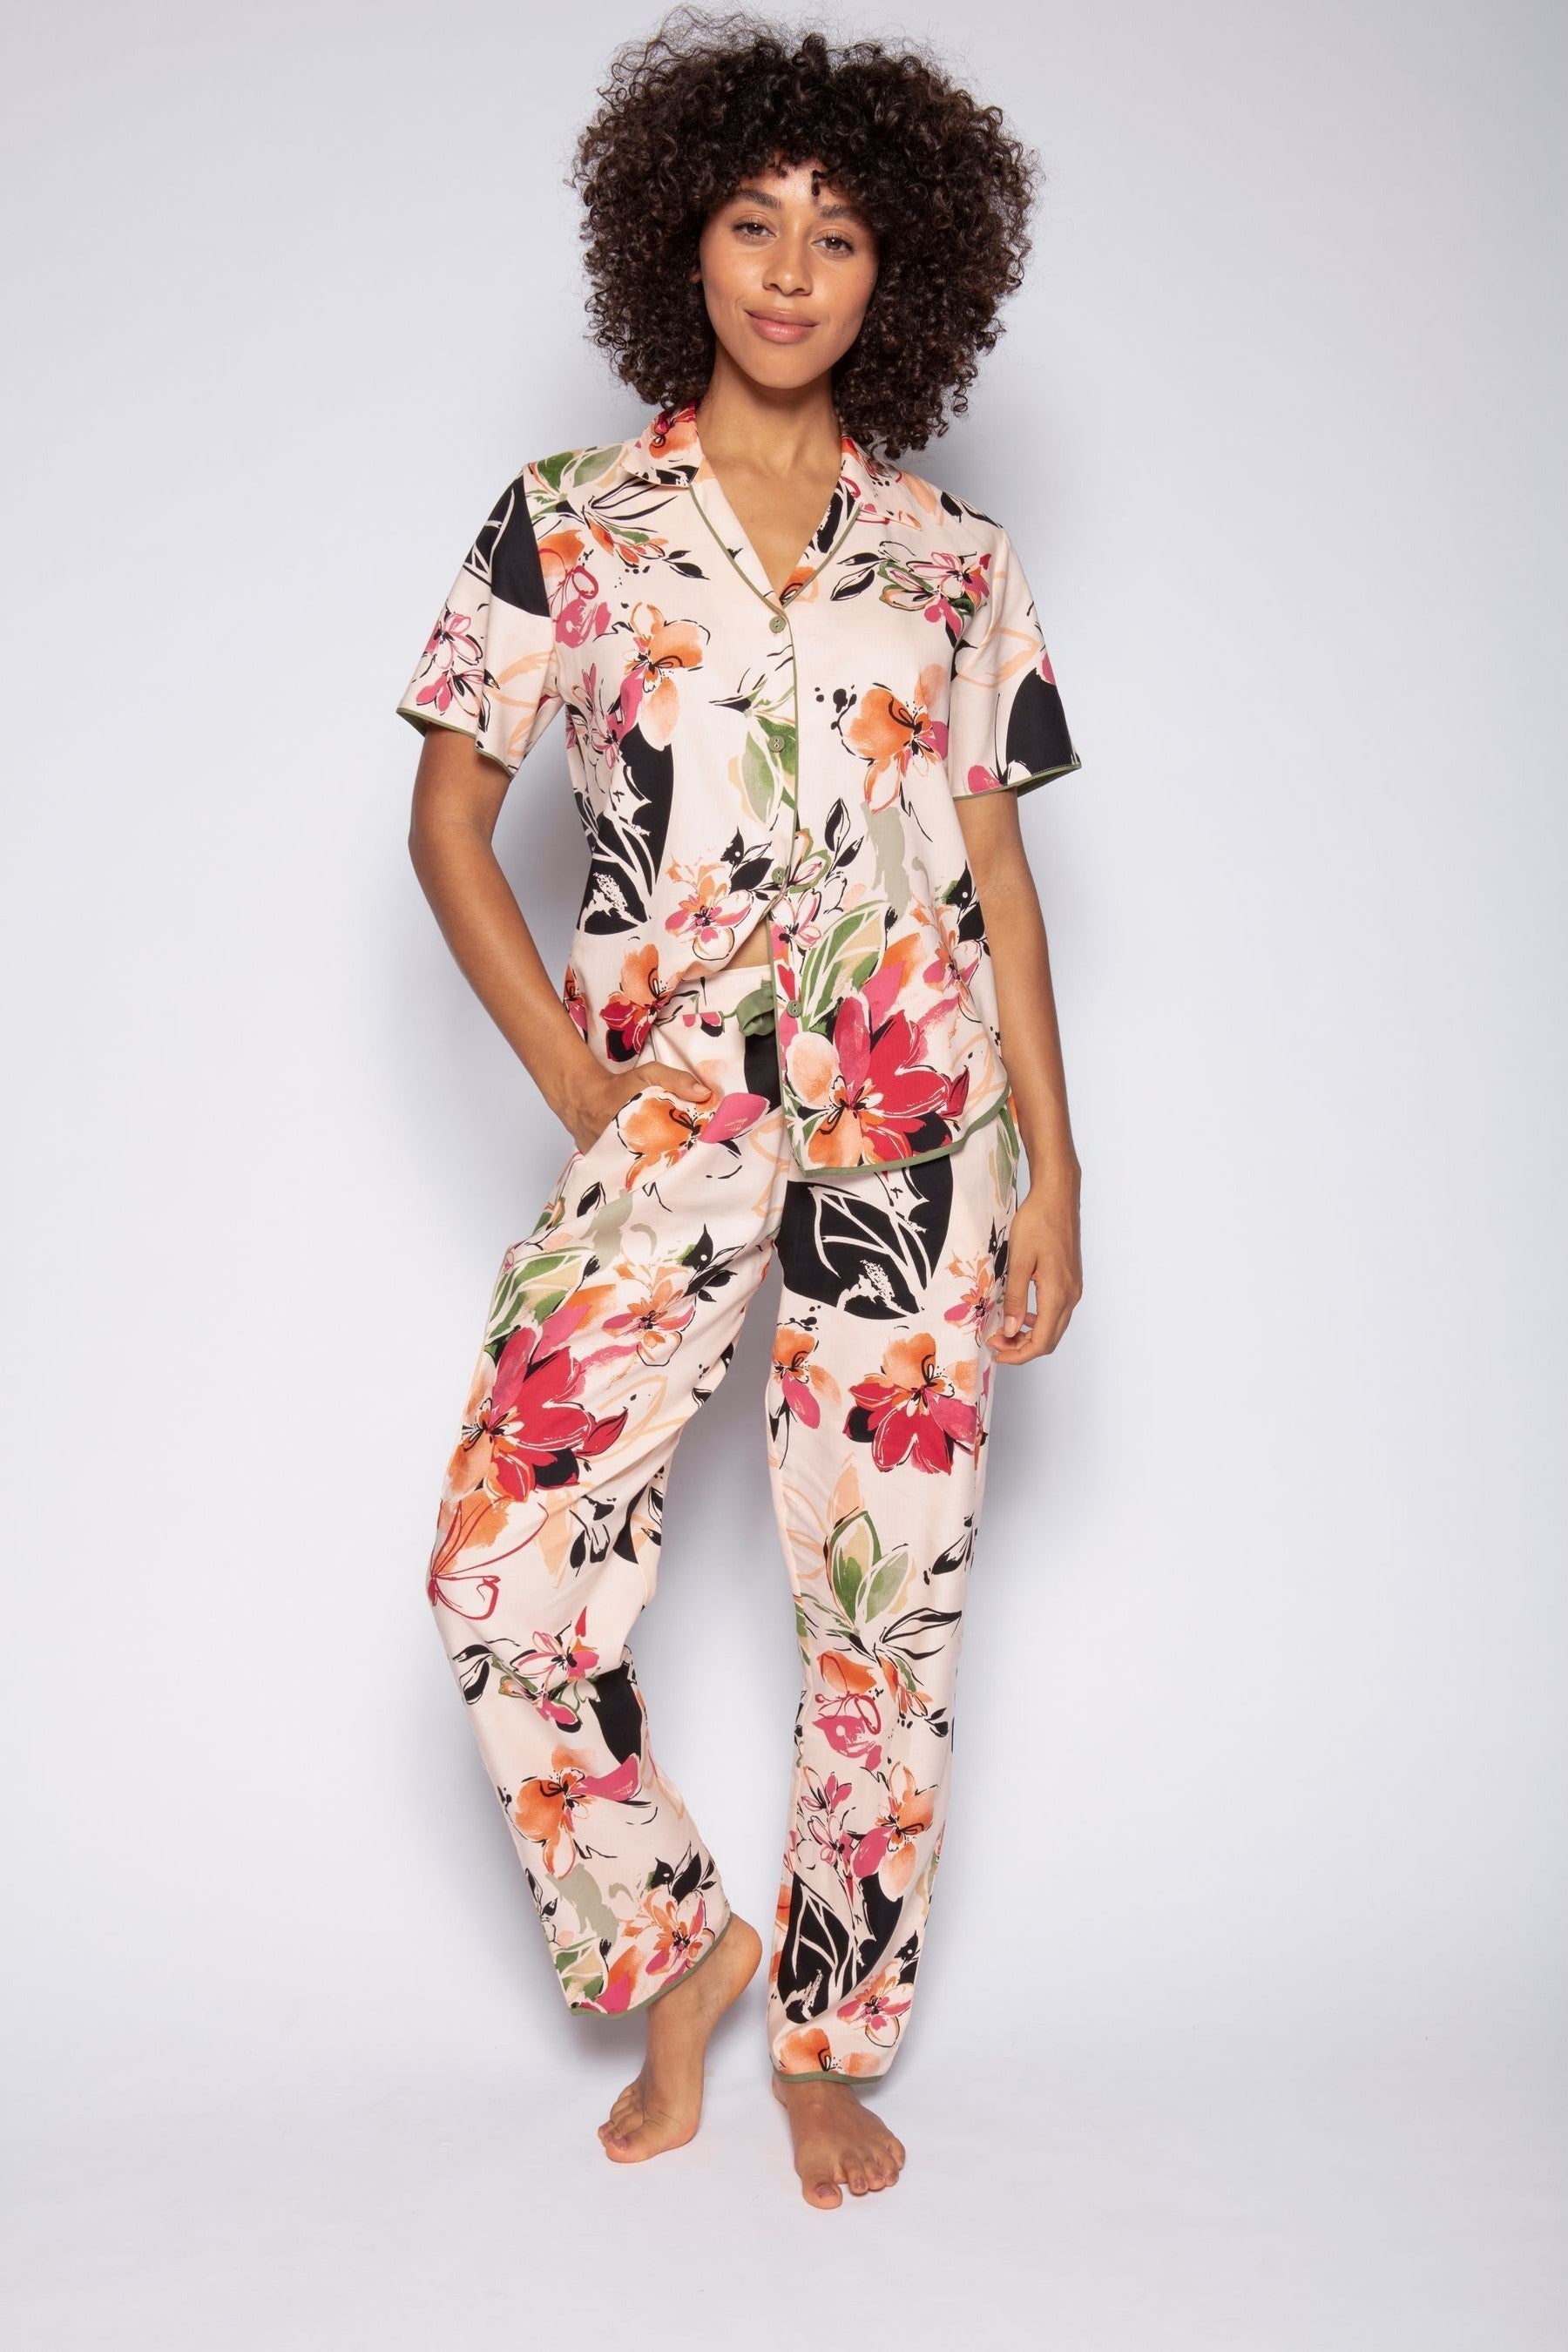 Multi Color Digital Abstract Printed loungewear/Nightsuit For Women With Pants.